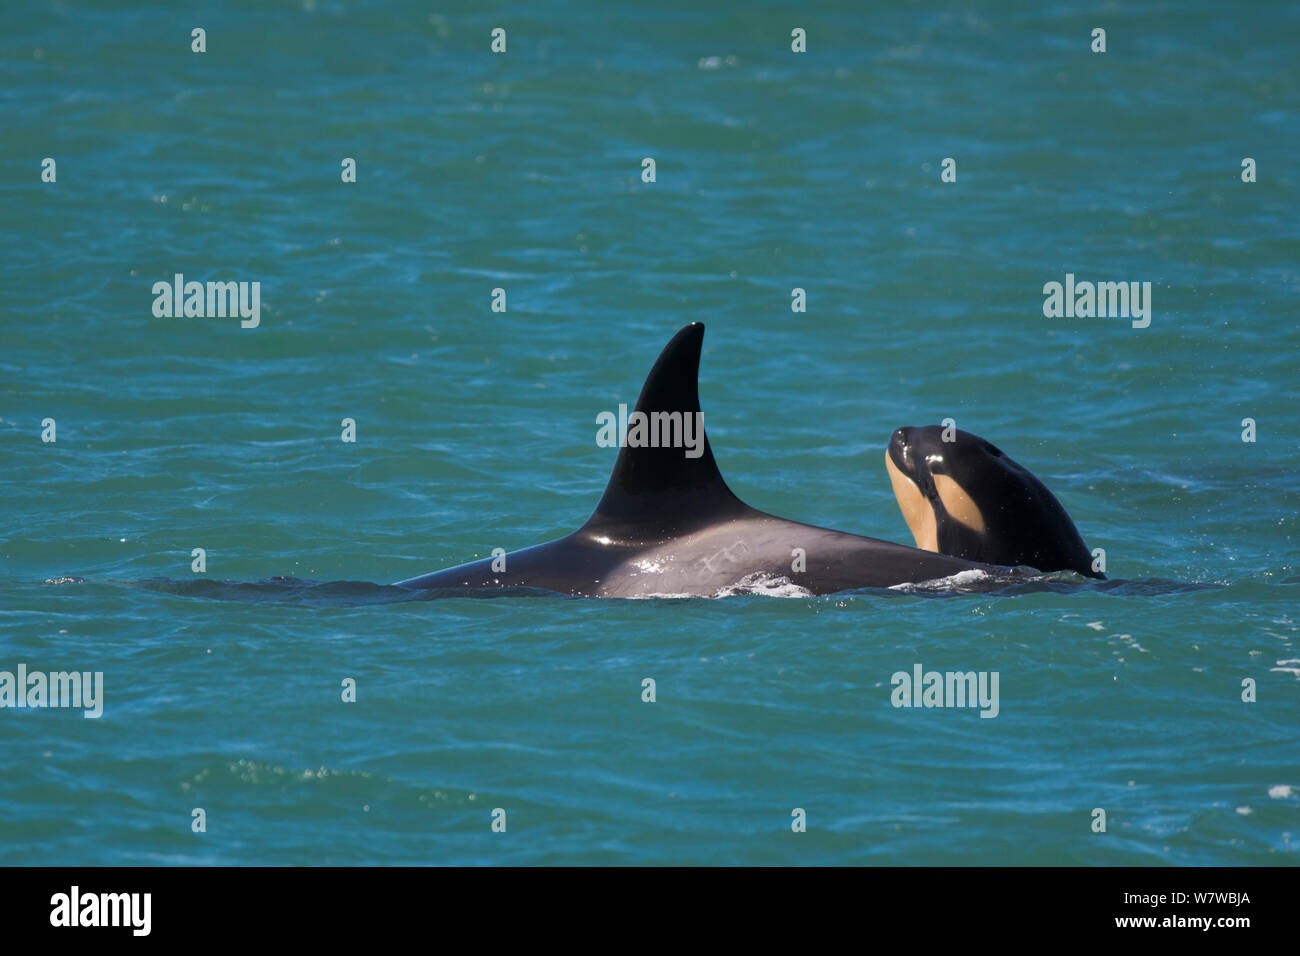 Orca (Orcinus orca) baby age 10 days, swimming with his mother. Punta Norte Natural Reserve, Peninsula Valdes, Chubut Province, Patagonia Argentina Stock Photo